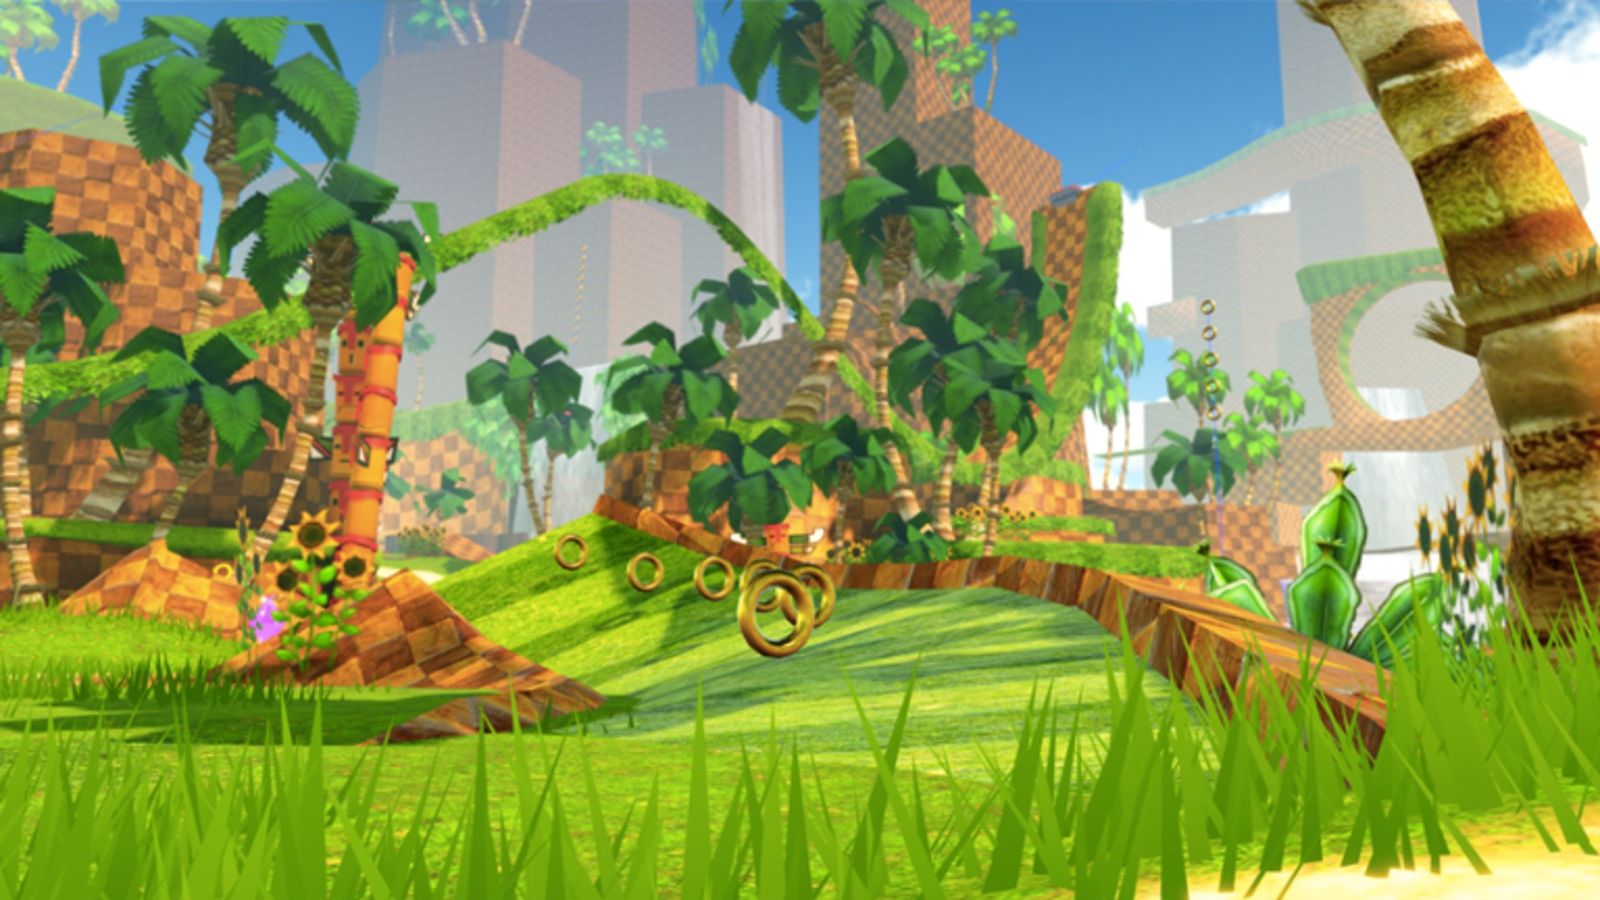 Image of a forest in Sonic Speed Simulator.